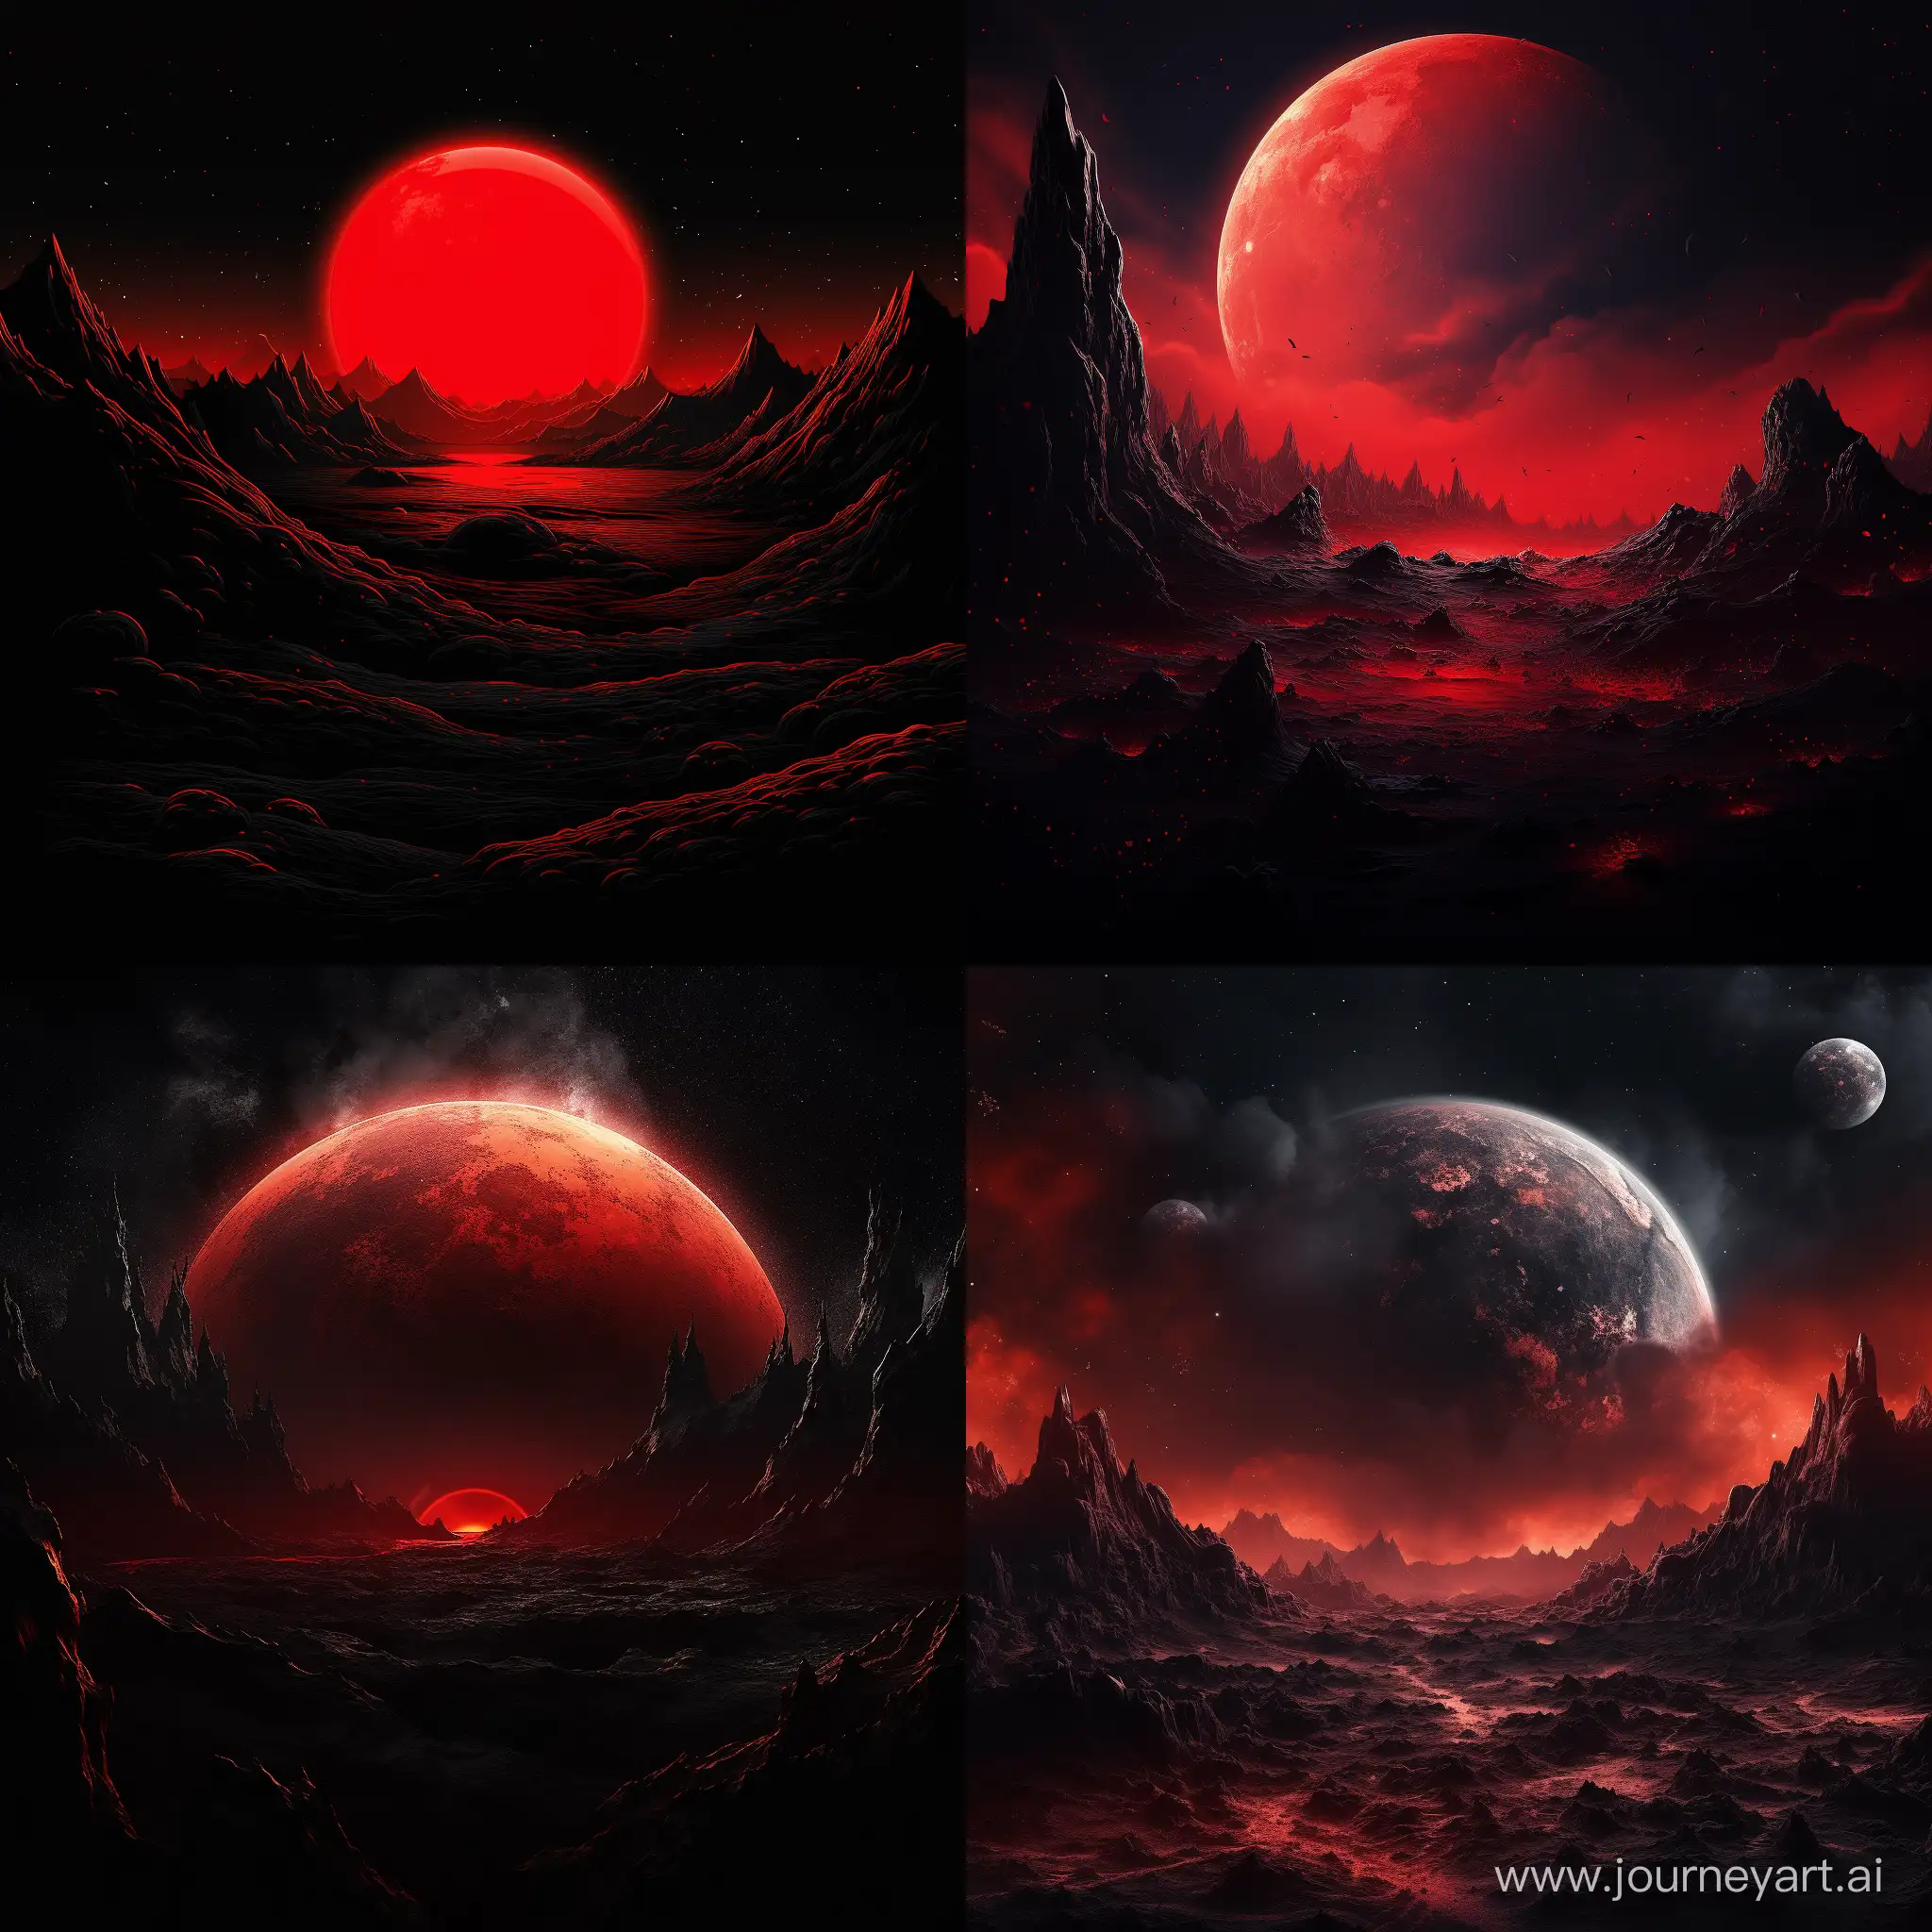 Stunning-Red-Planet-on-Black-Canvas-Striking-Artistic-Image